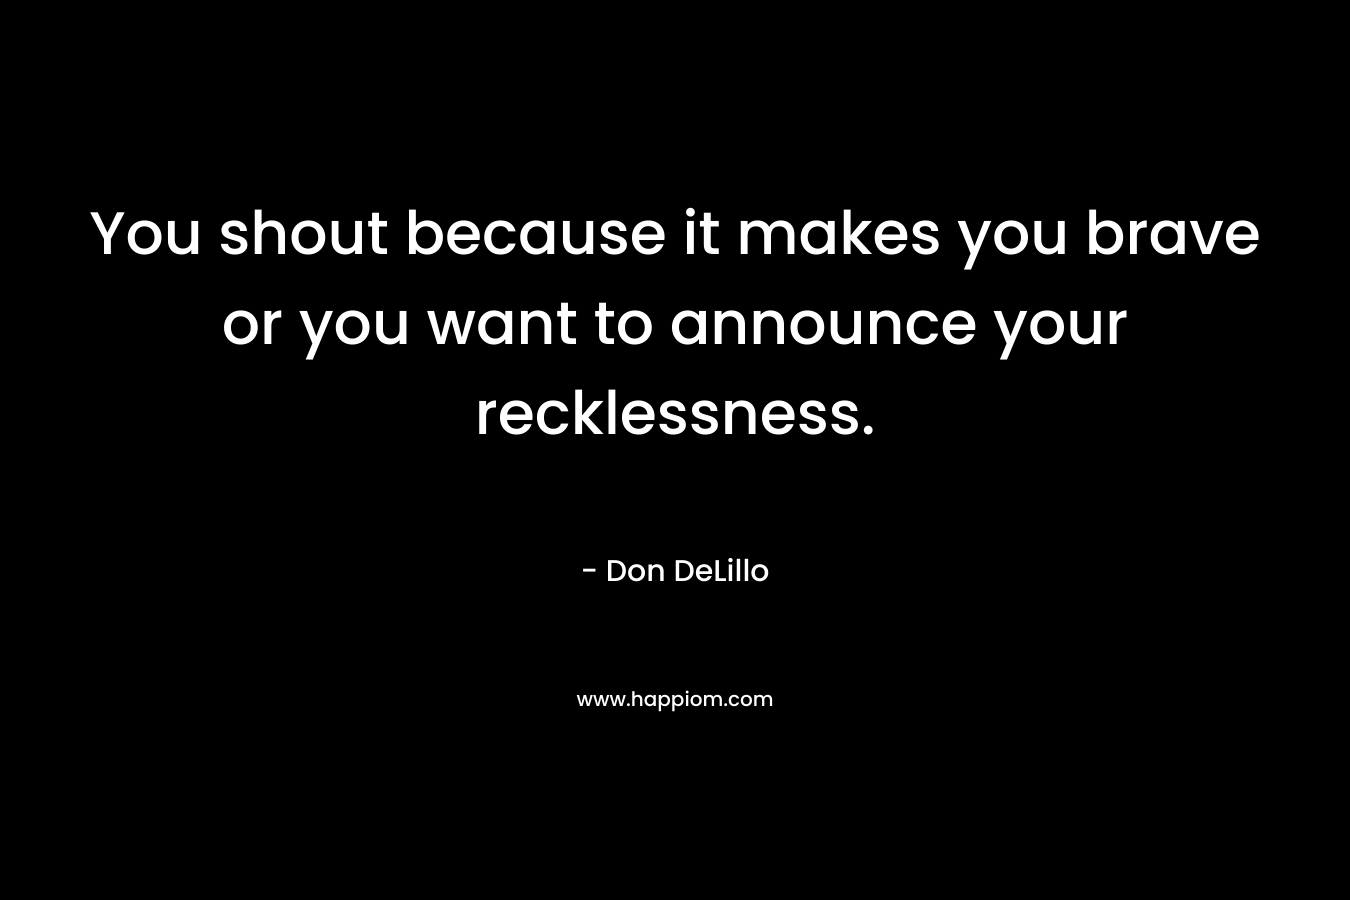 You shout because it makes you brave or you want to announce your recklessness. – Don DeLillo